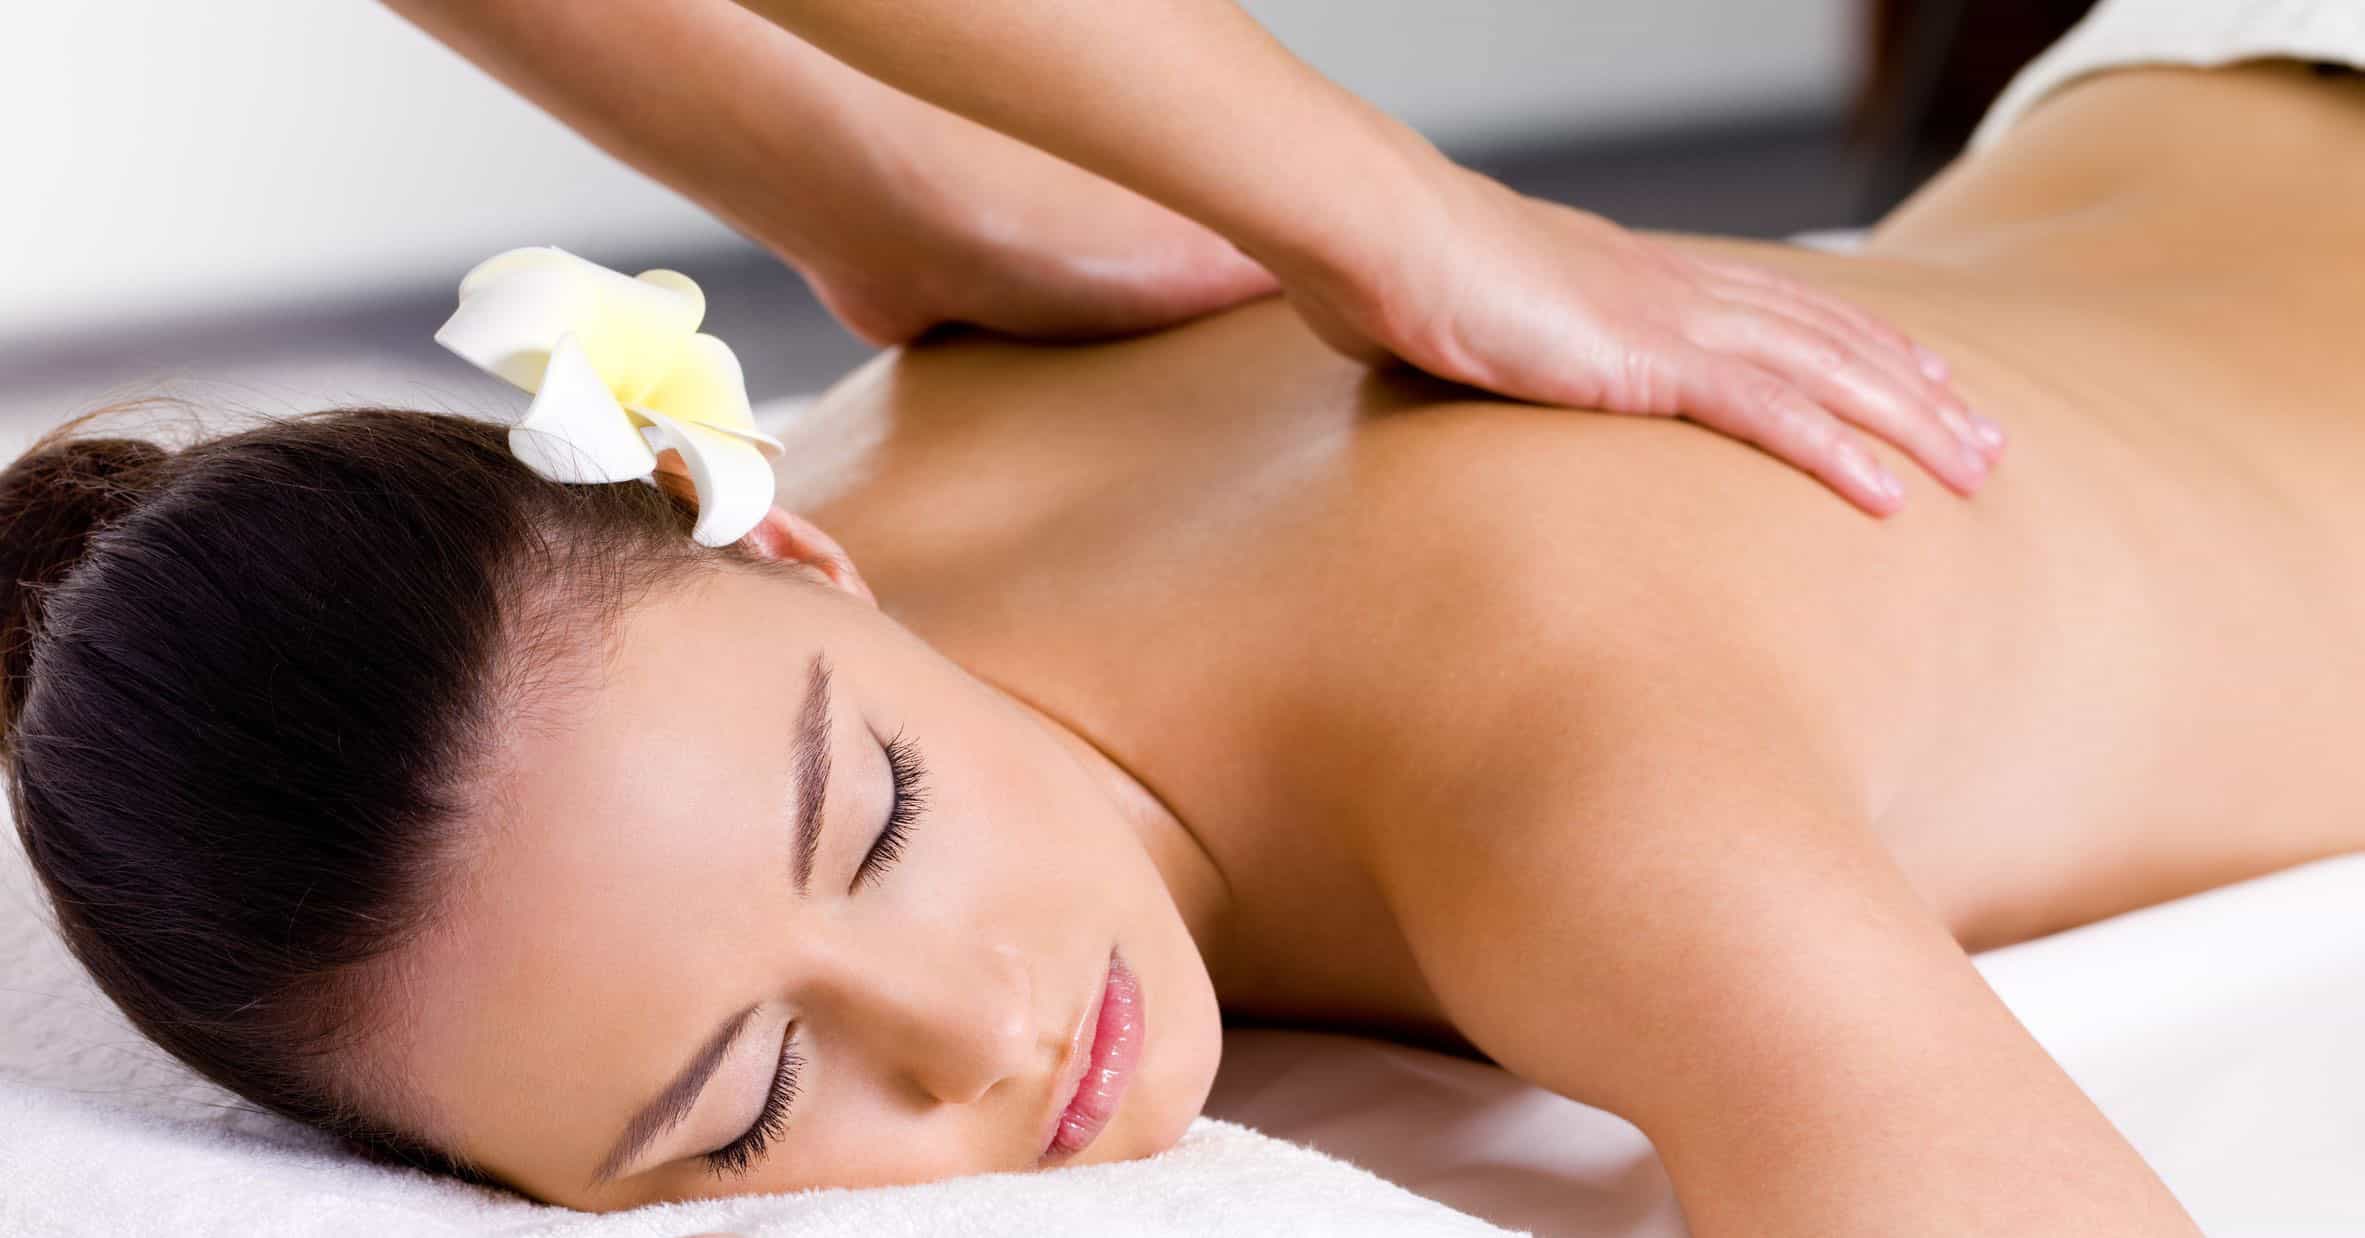 The Power of Touch – Why Massage Isn't an Indulgence - Bali BISA